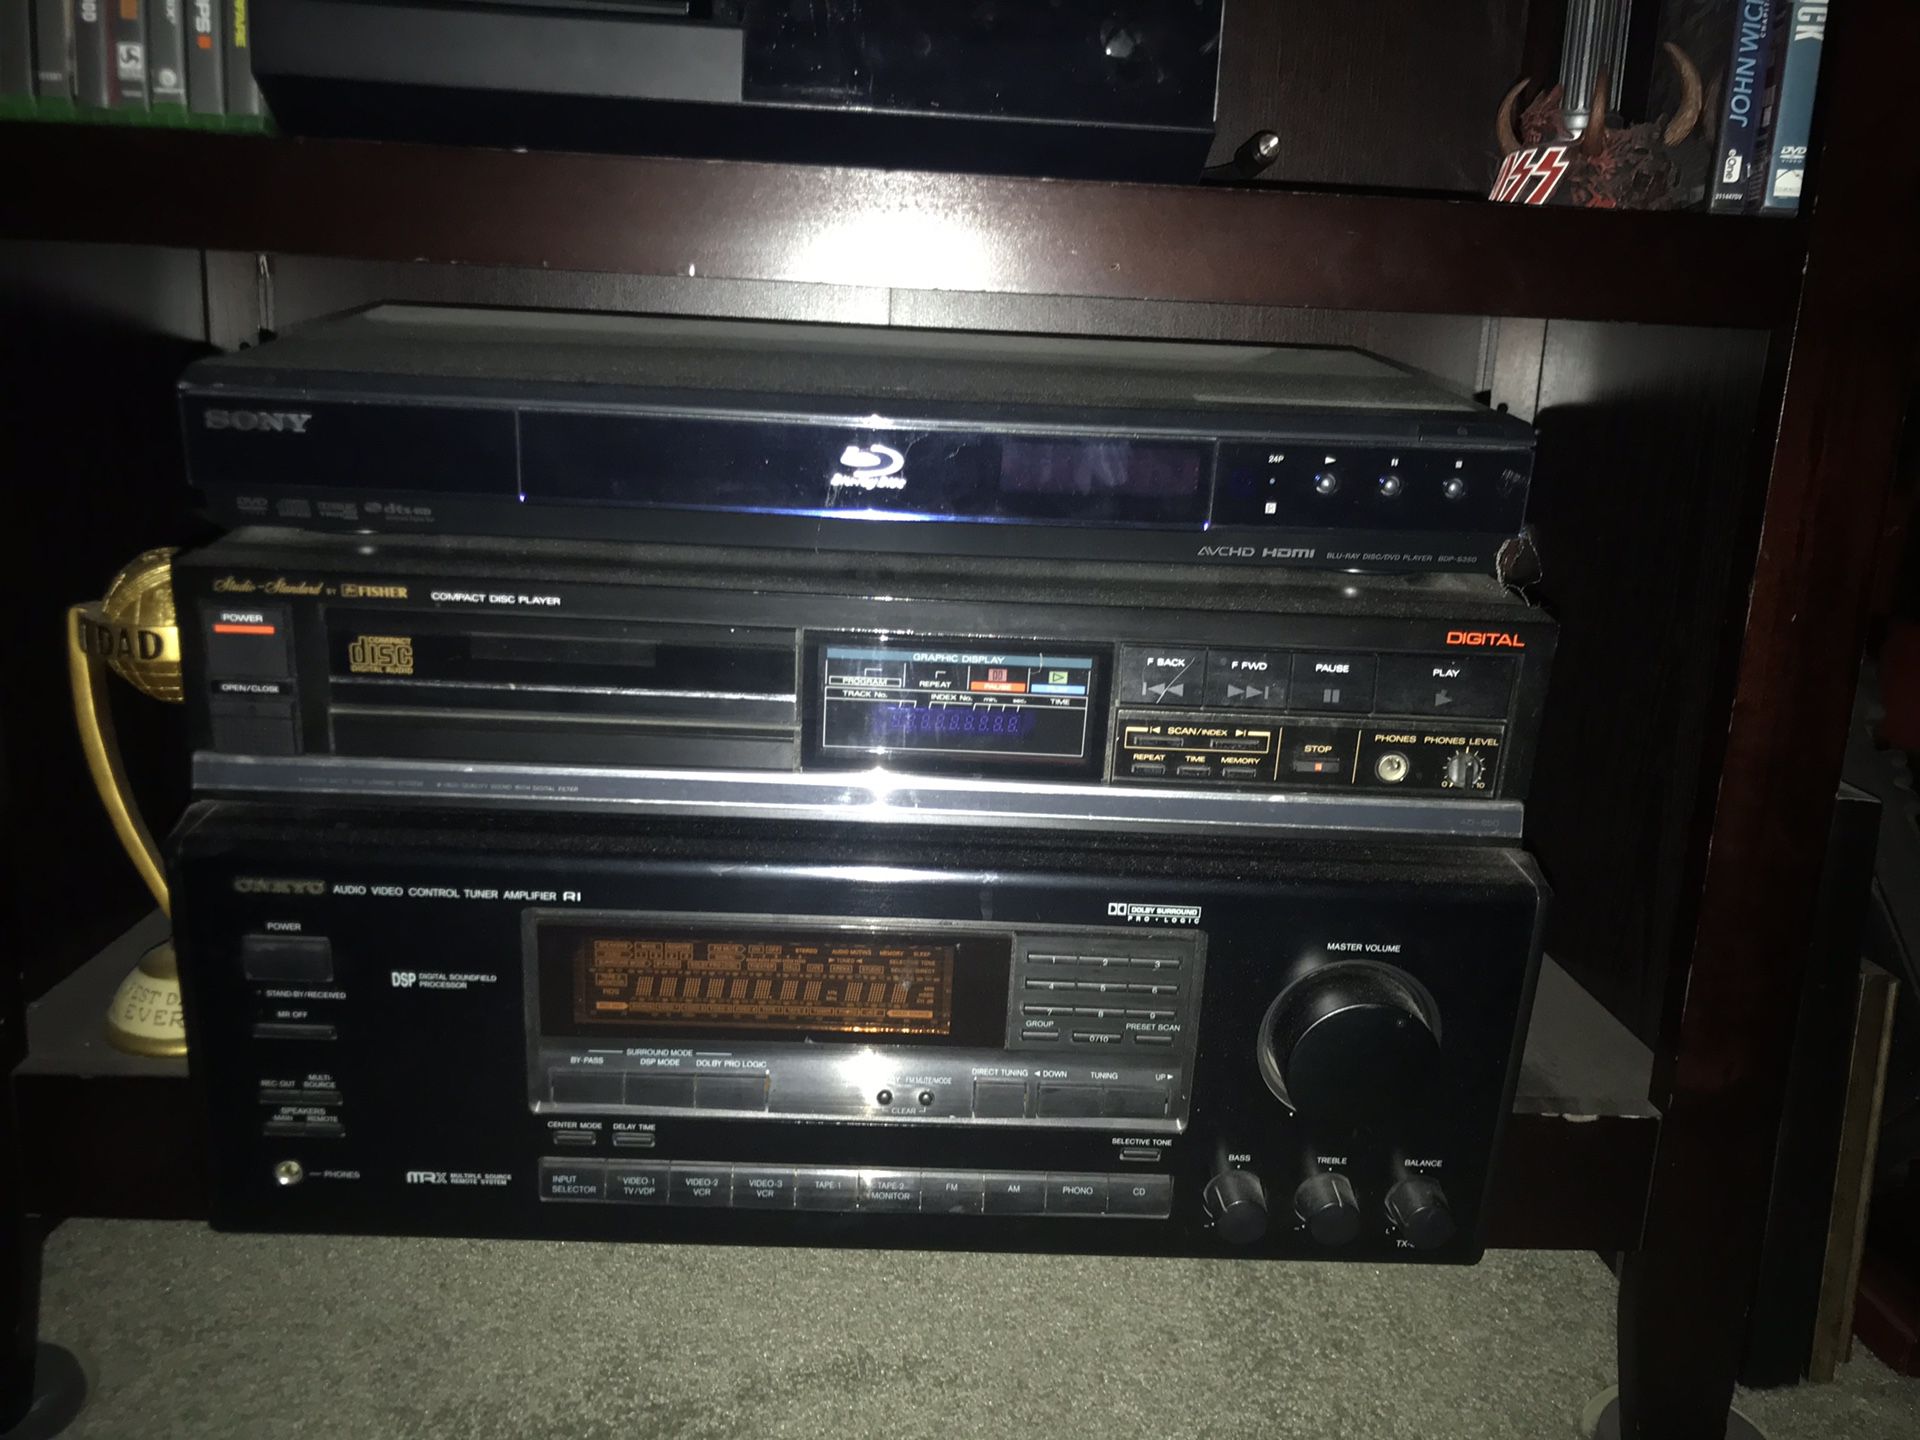 Onkyo receiver and Fisher CD player